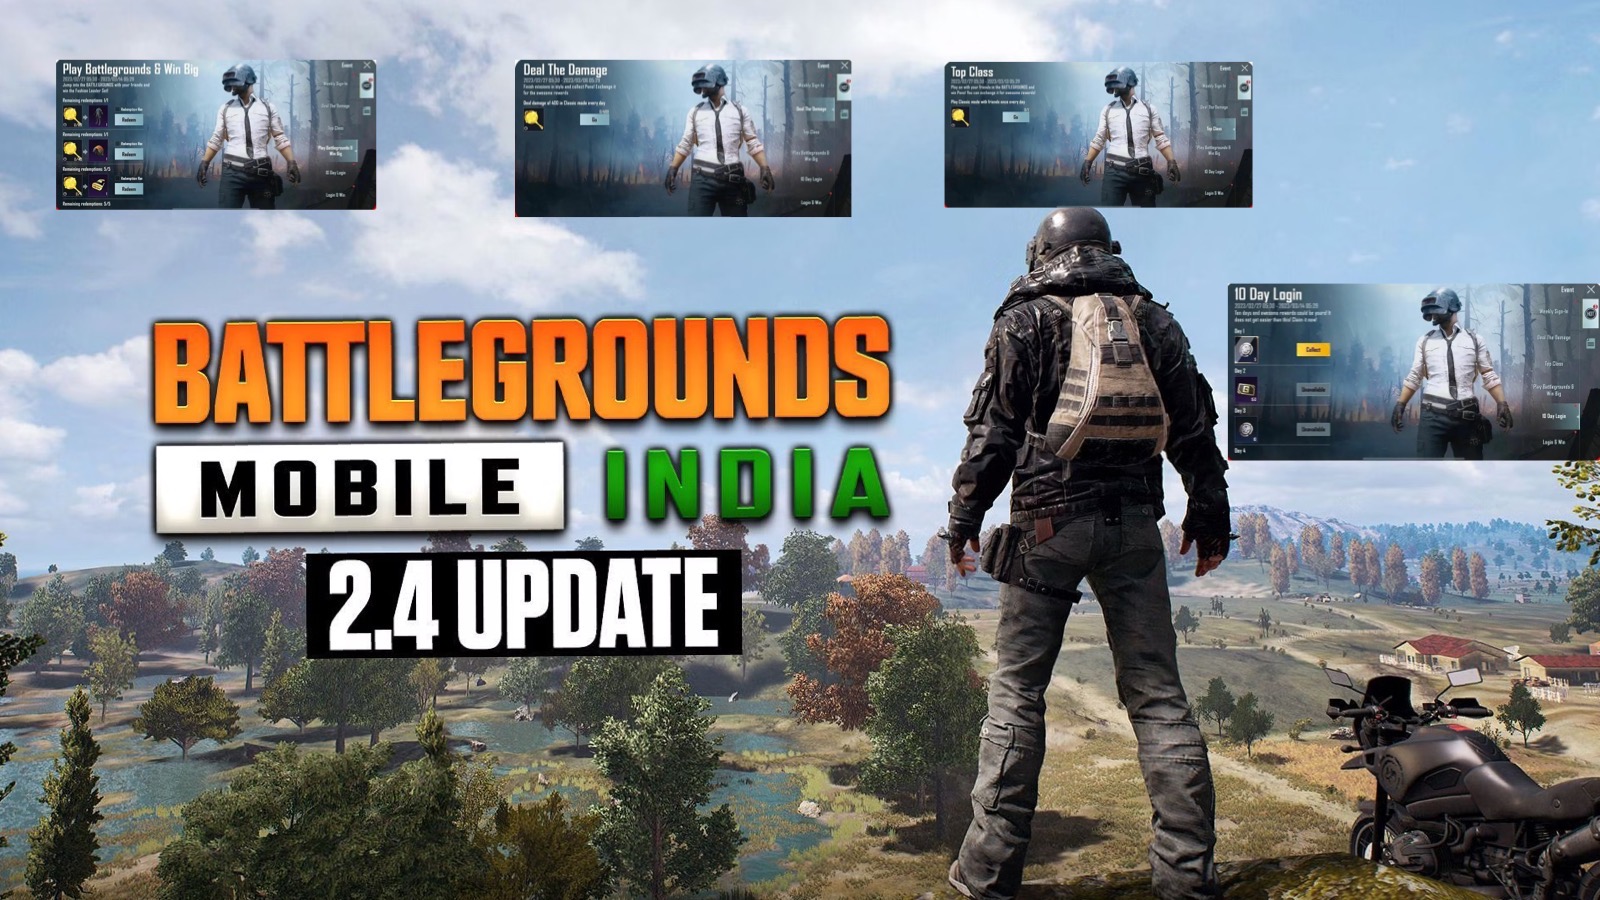 Battlegrounds Mobile India Rumors: Will it Make a Comeback in April 2023?